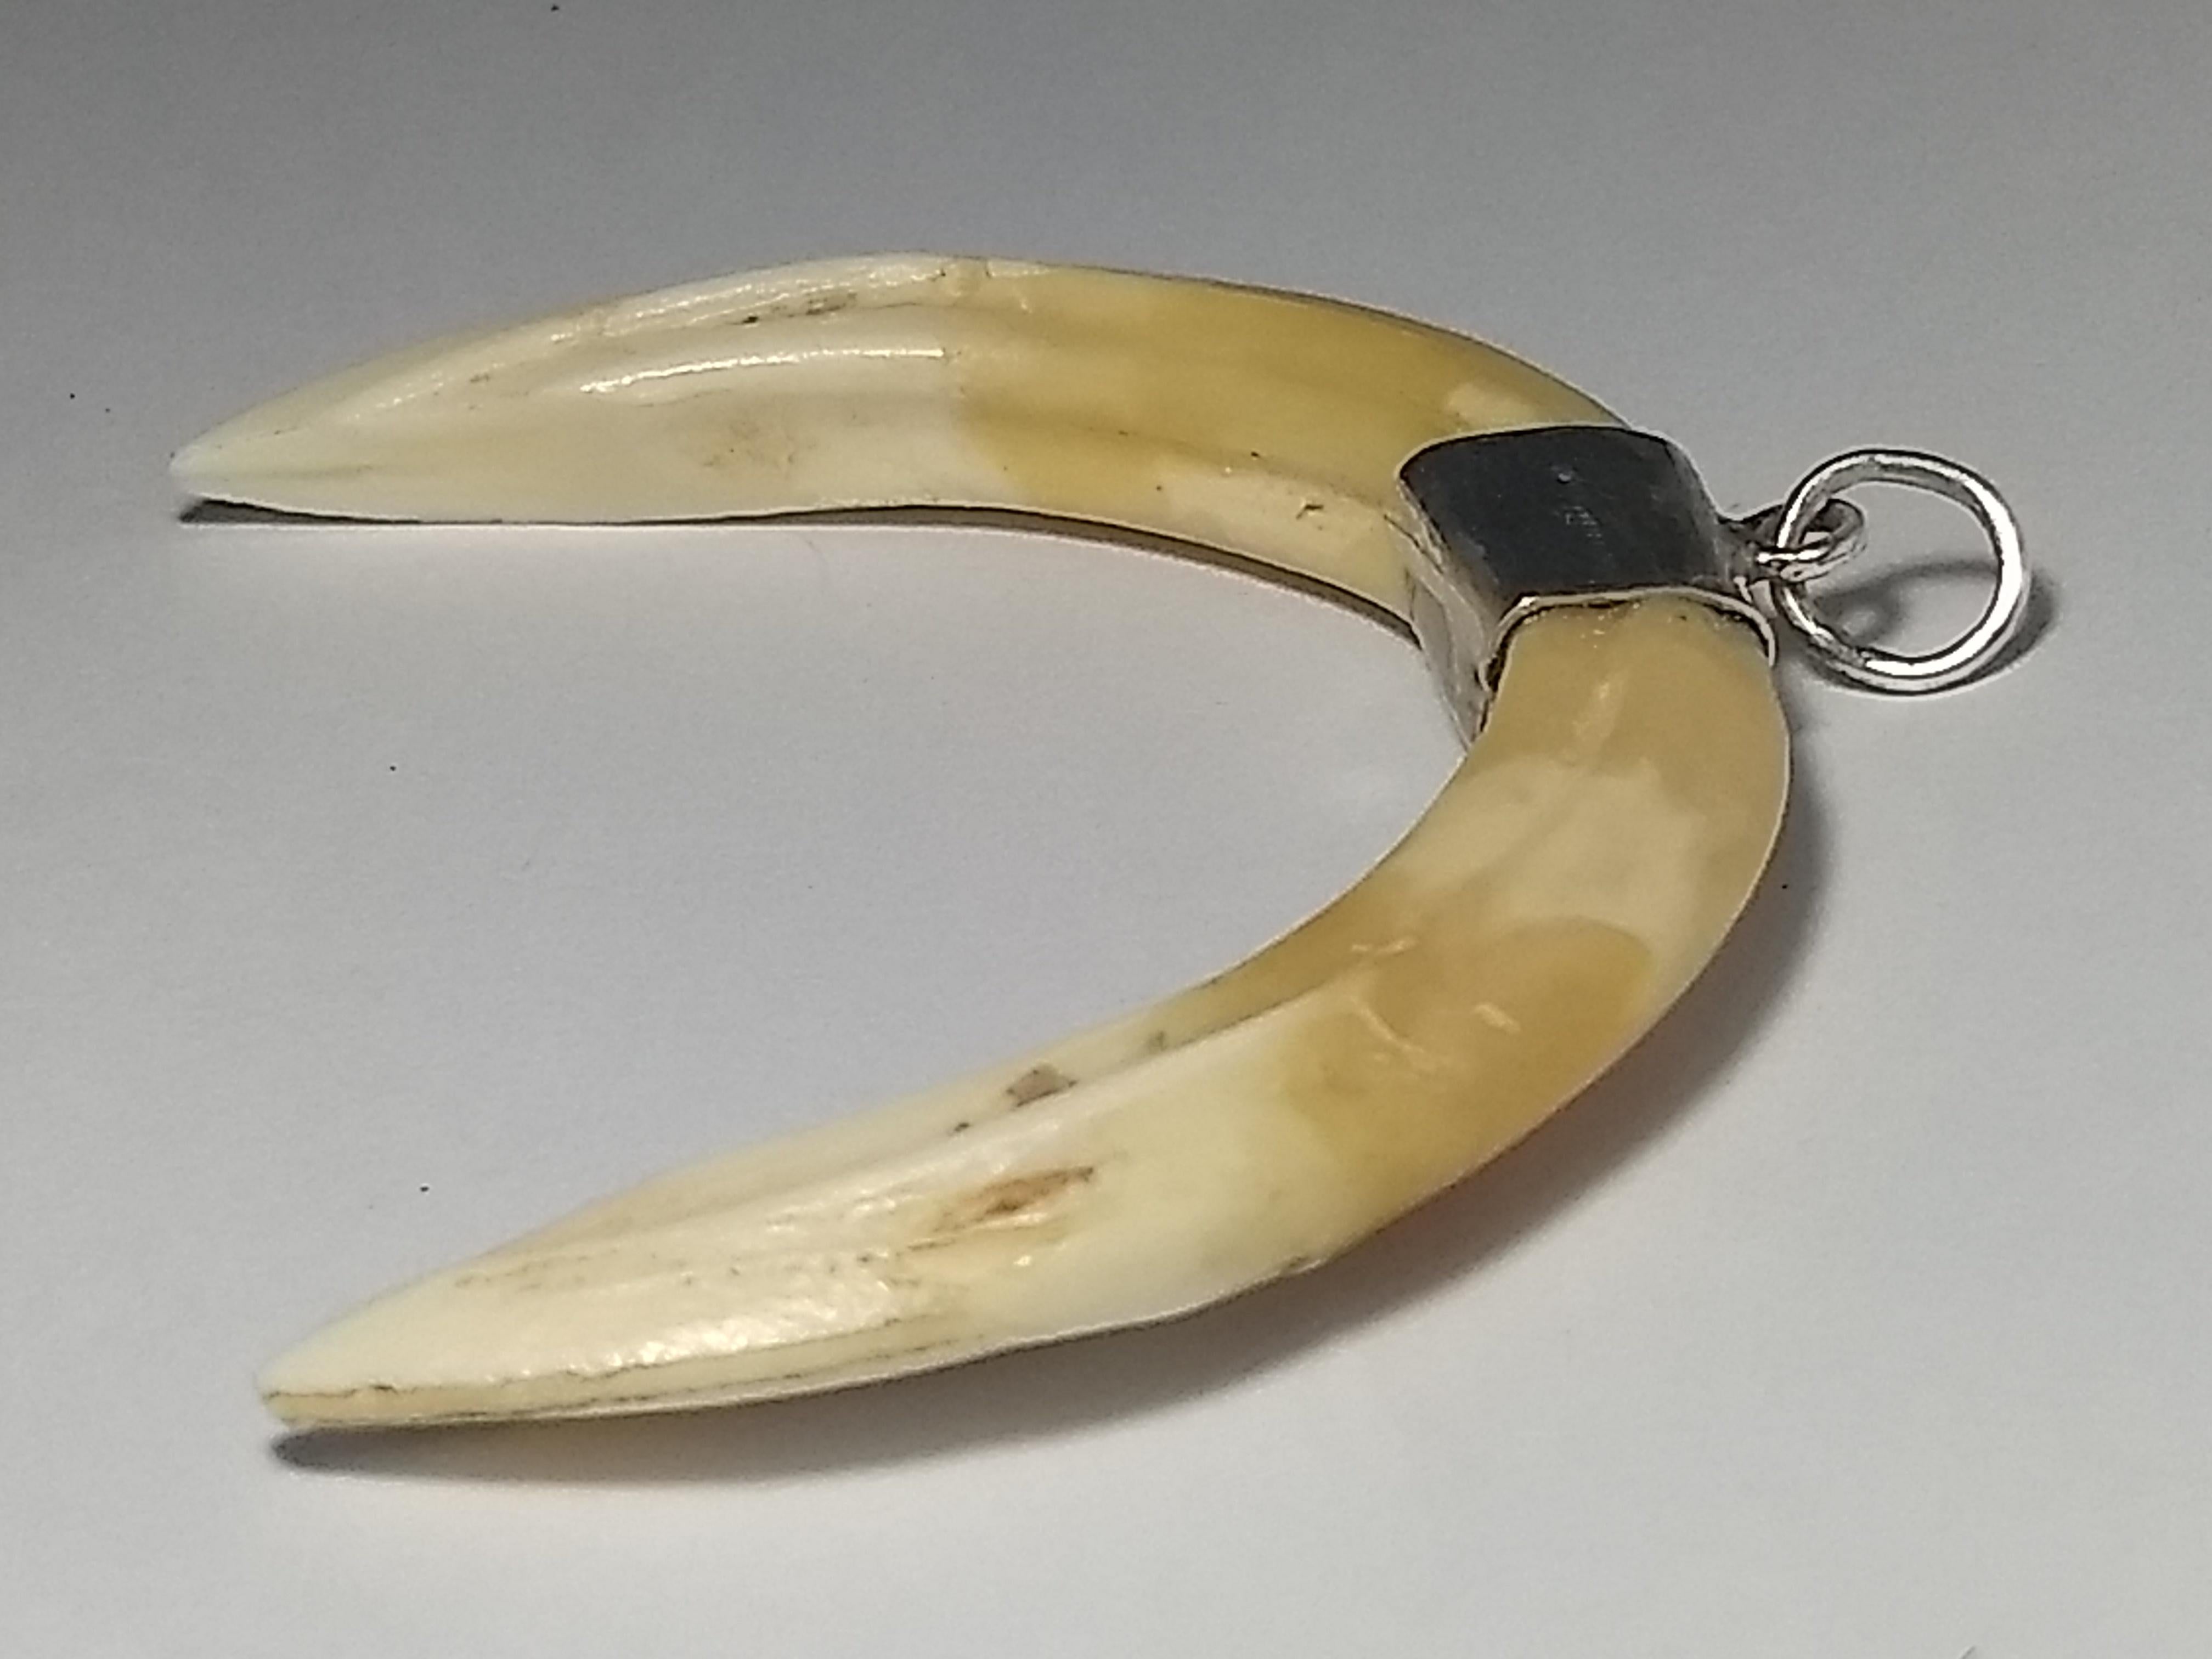 This Alberto Juan one of a kind pendant was made from 2 wild boars tusks and sterling silver, unmarked. This pendant measures 2.5